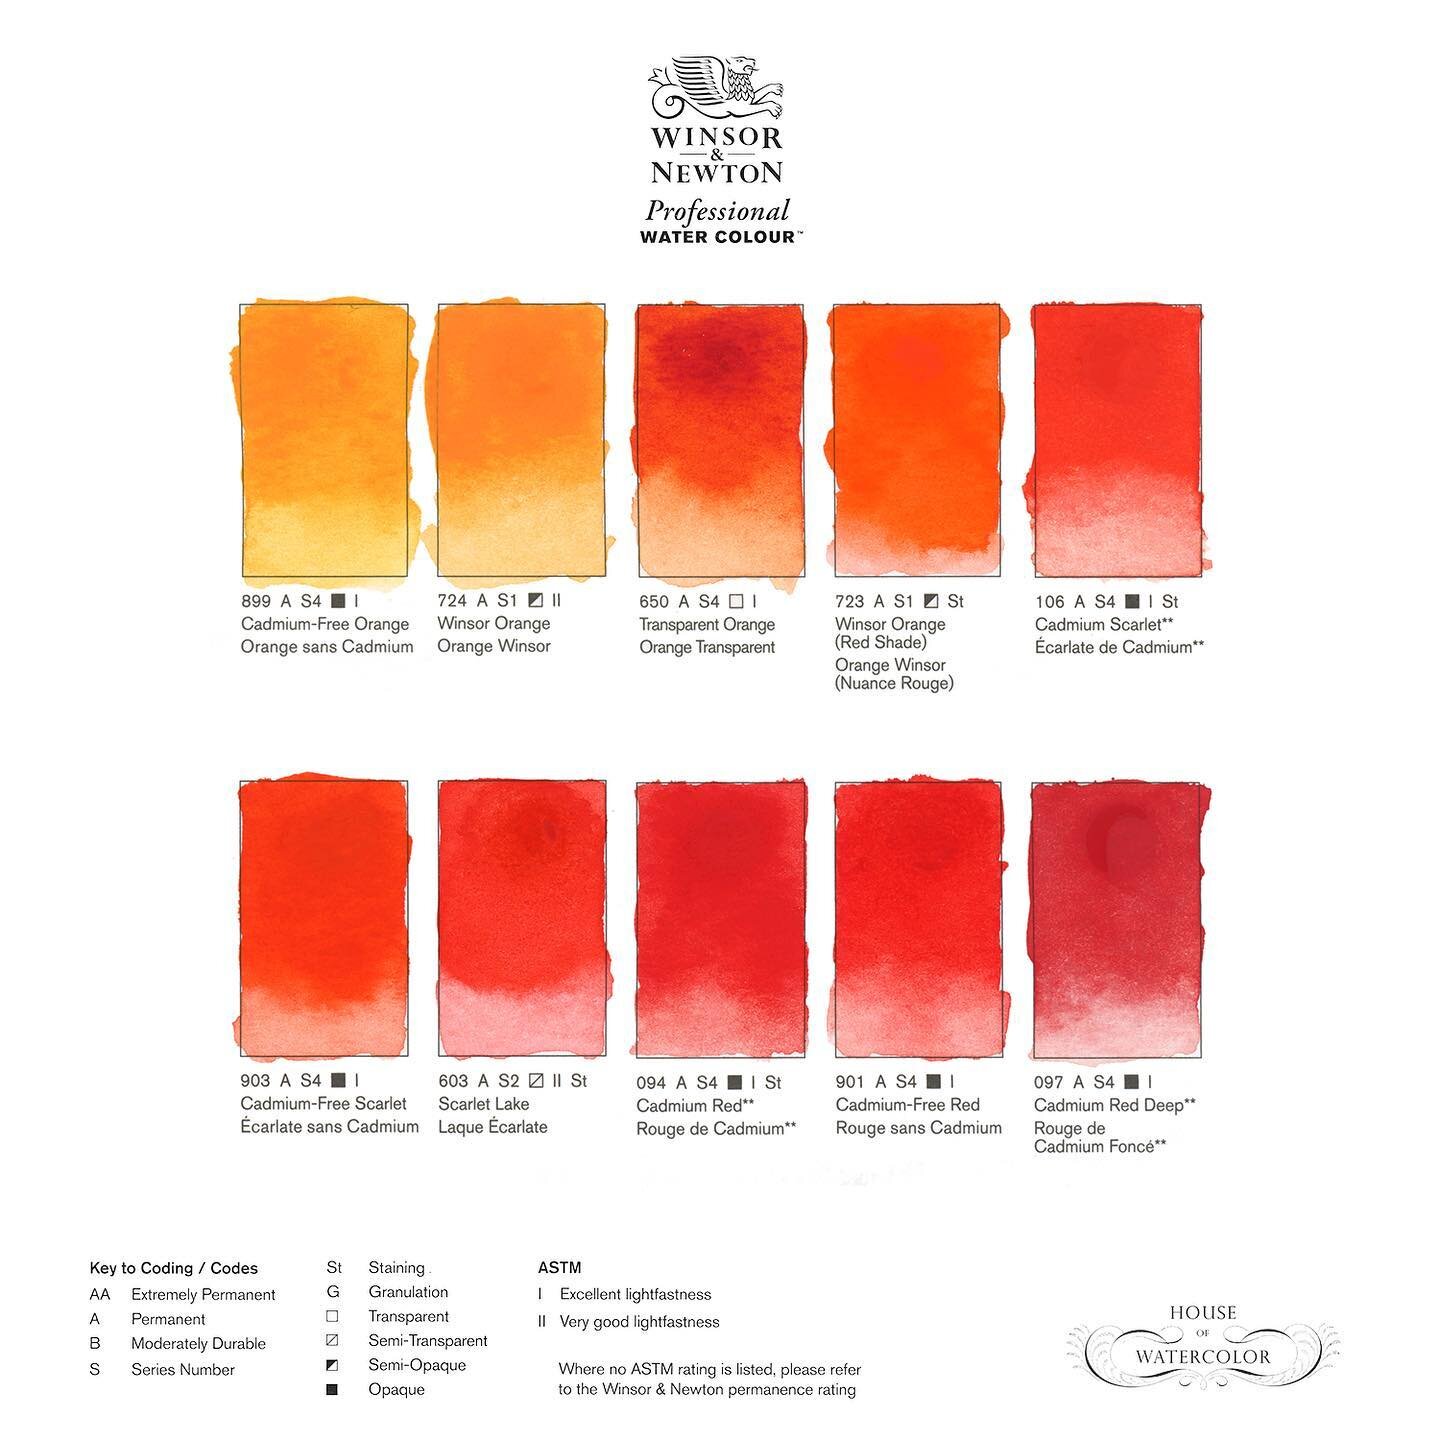 Head on over to my website to view high resolution scans of the entire Winsor &amp; Newton range of watercolors. 🙌

I know several artists who paint exclusively with Winsor &amp; Newton watercolors. Are you one of them, or is there a color of theirs